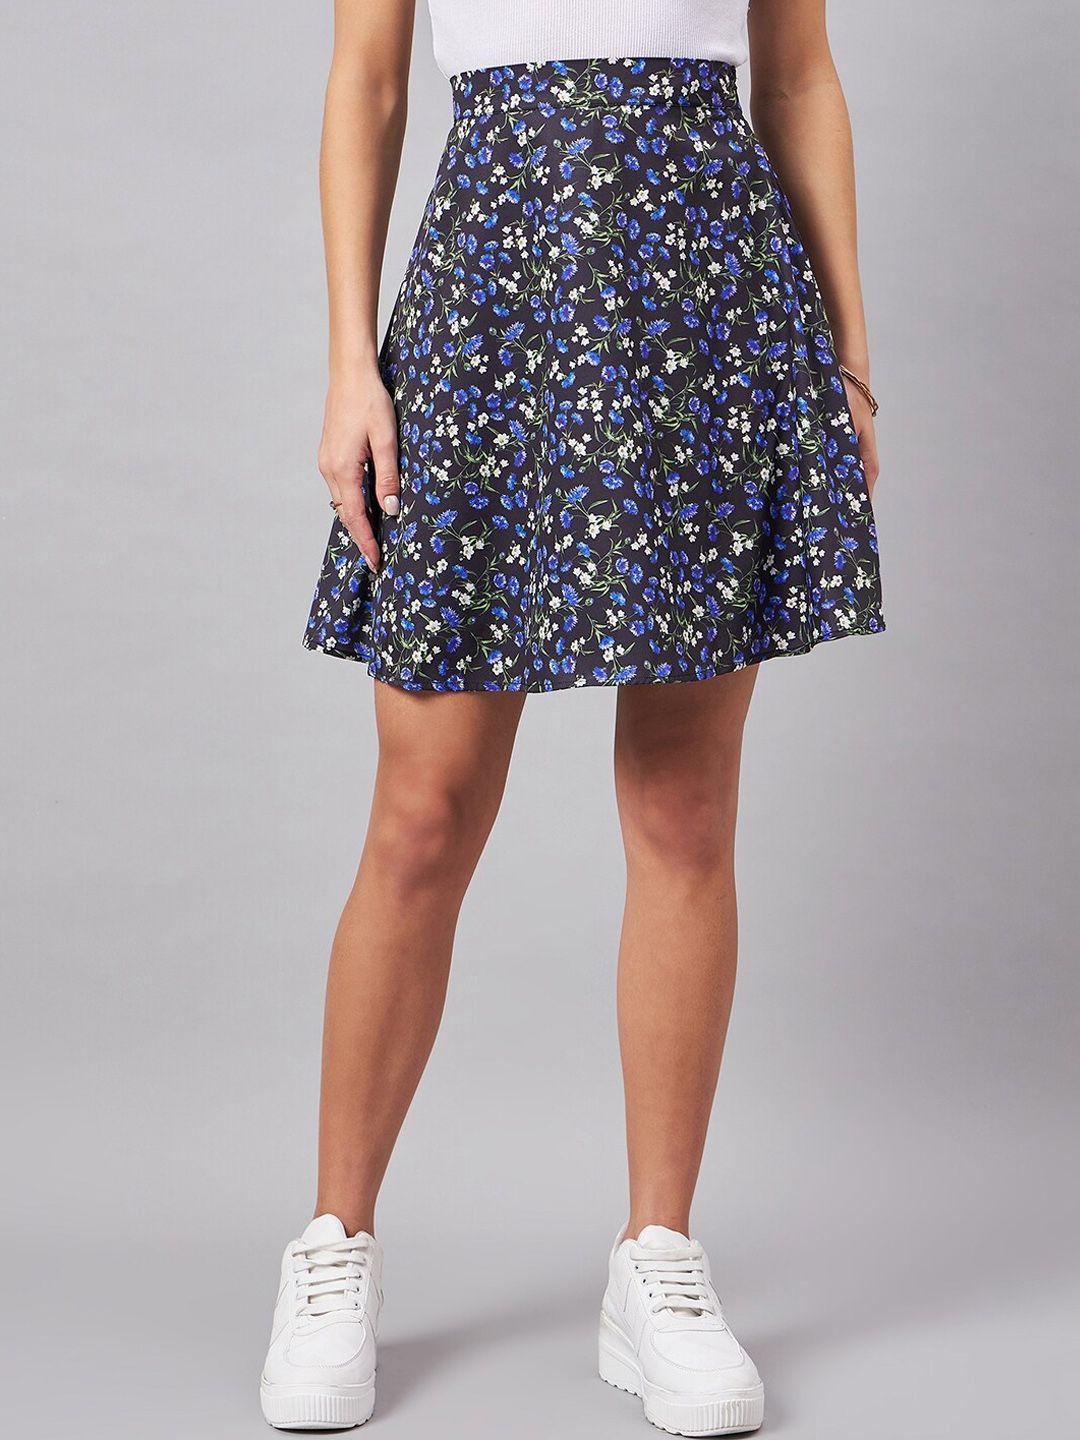 style quotient floral printed a-line mini skirt